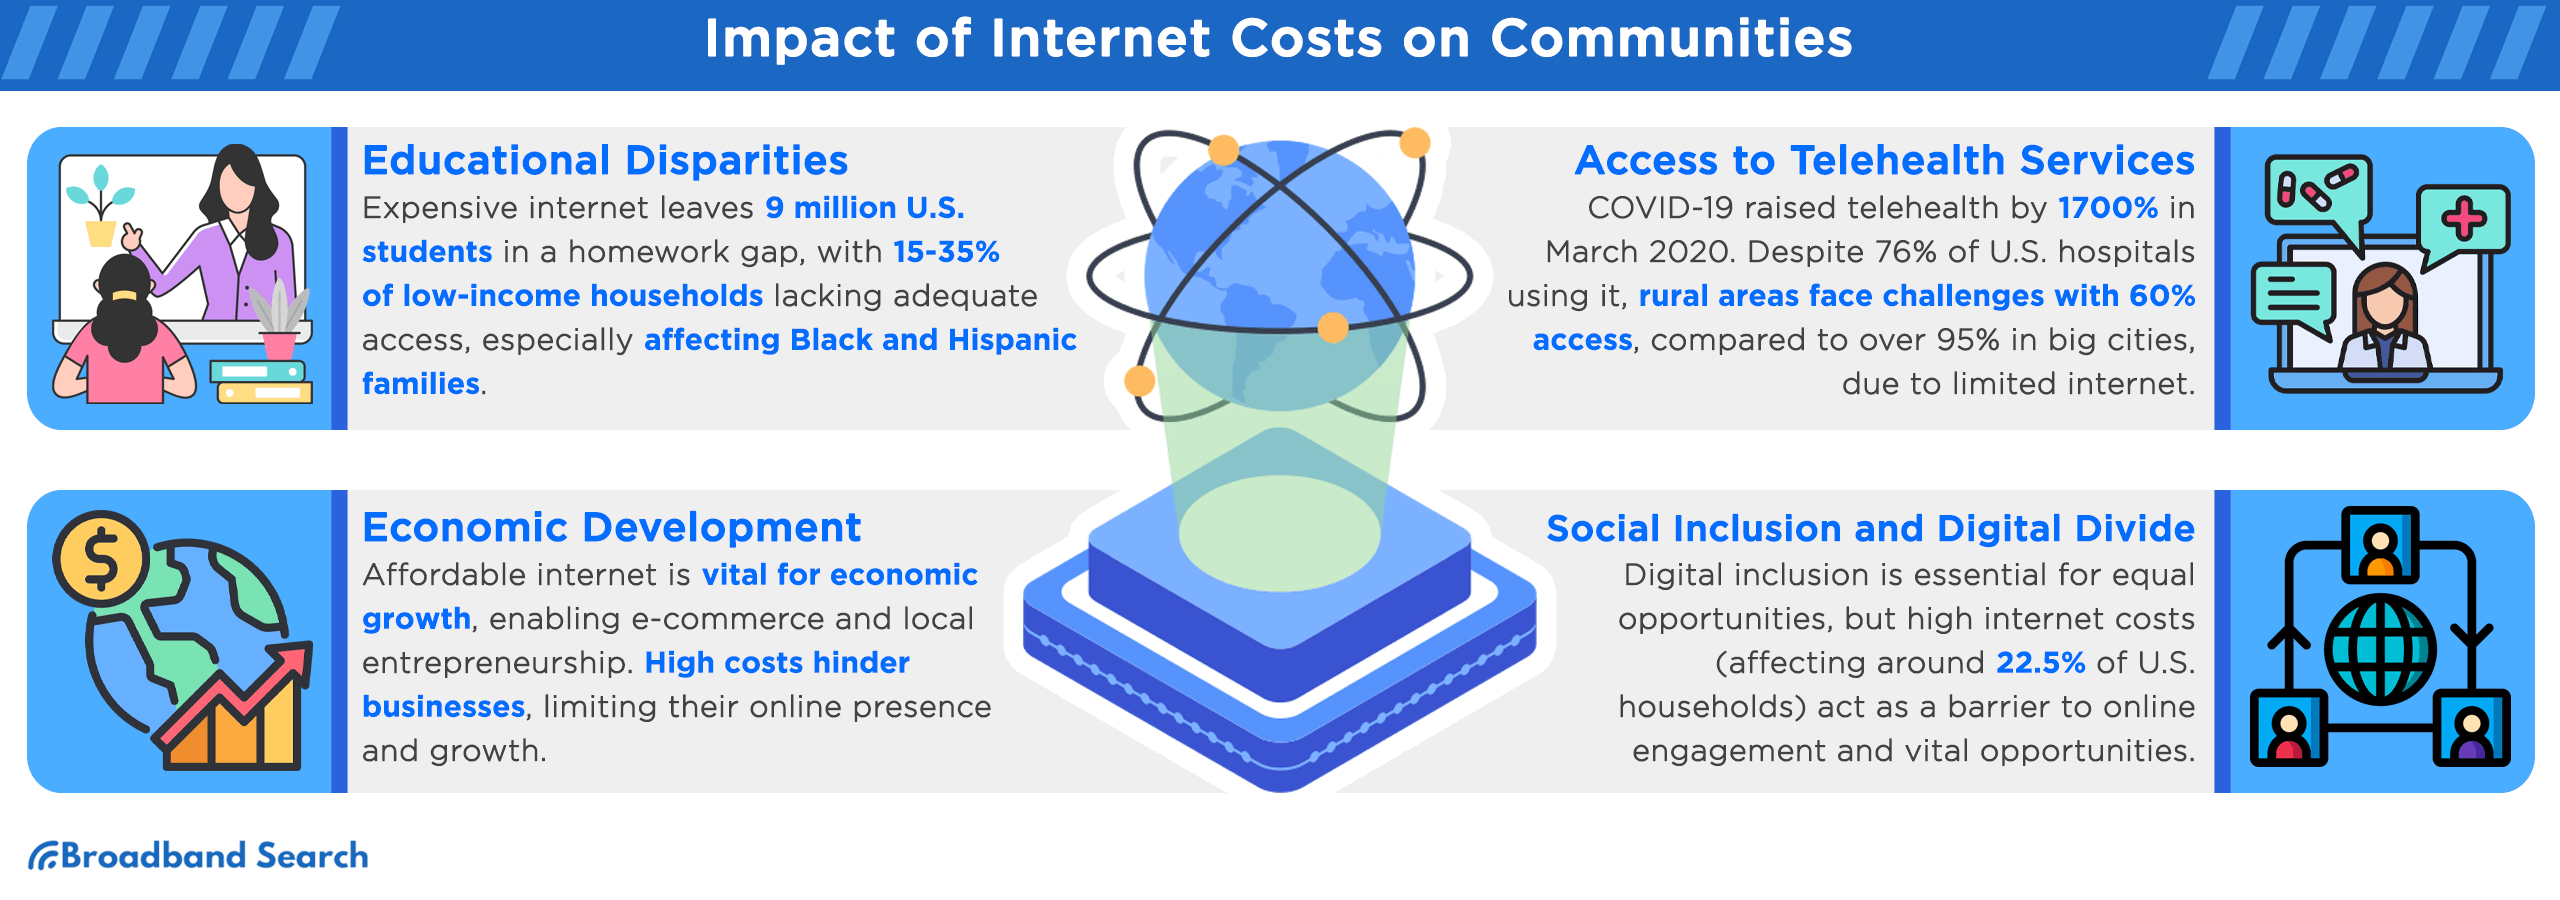 Impact of internet costs on communities